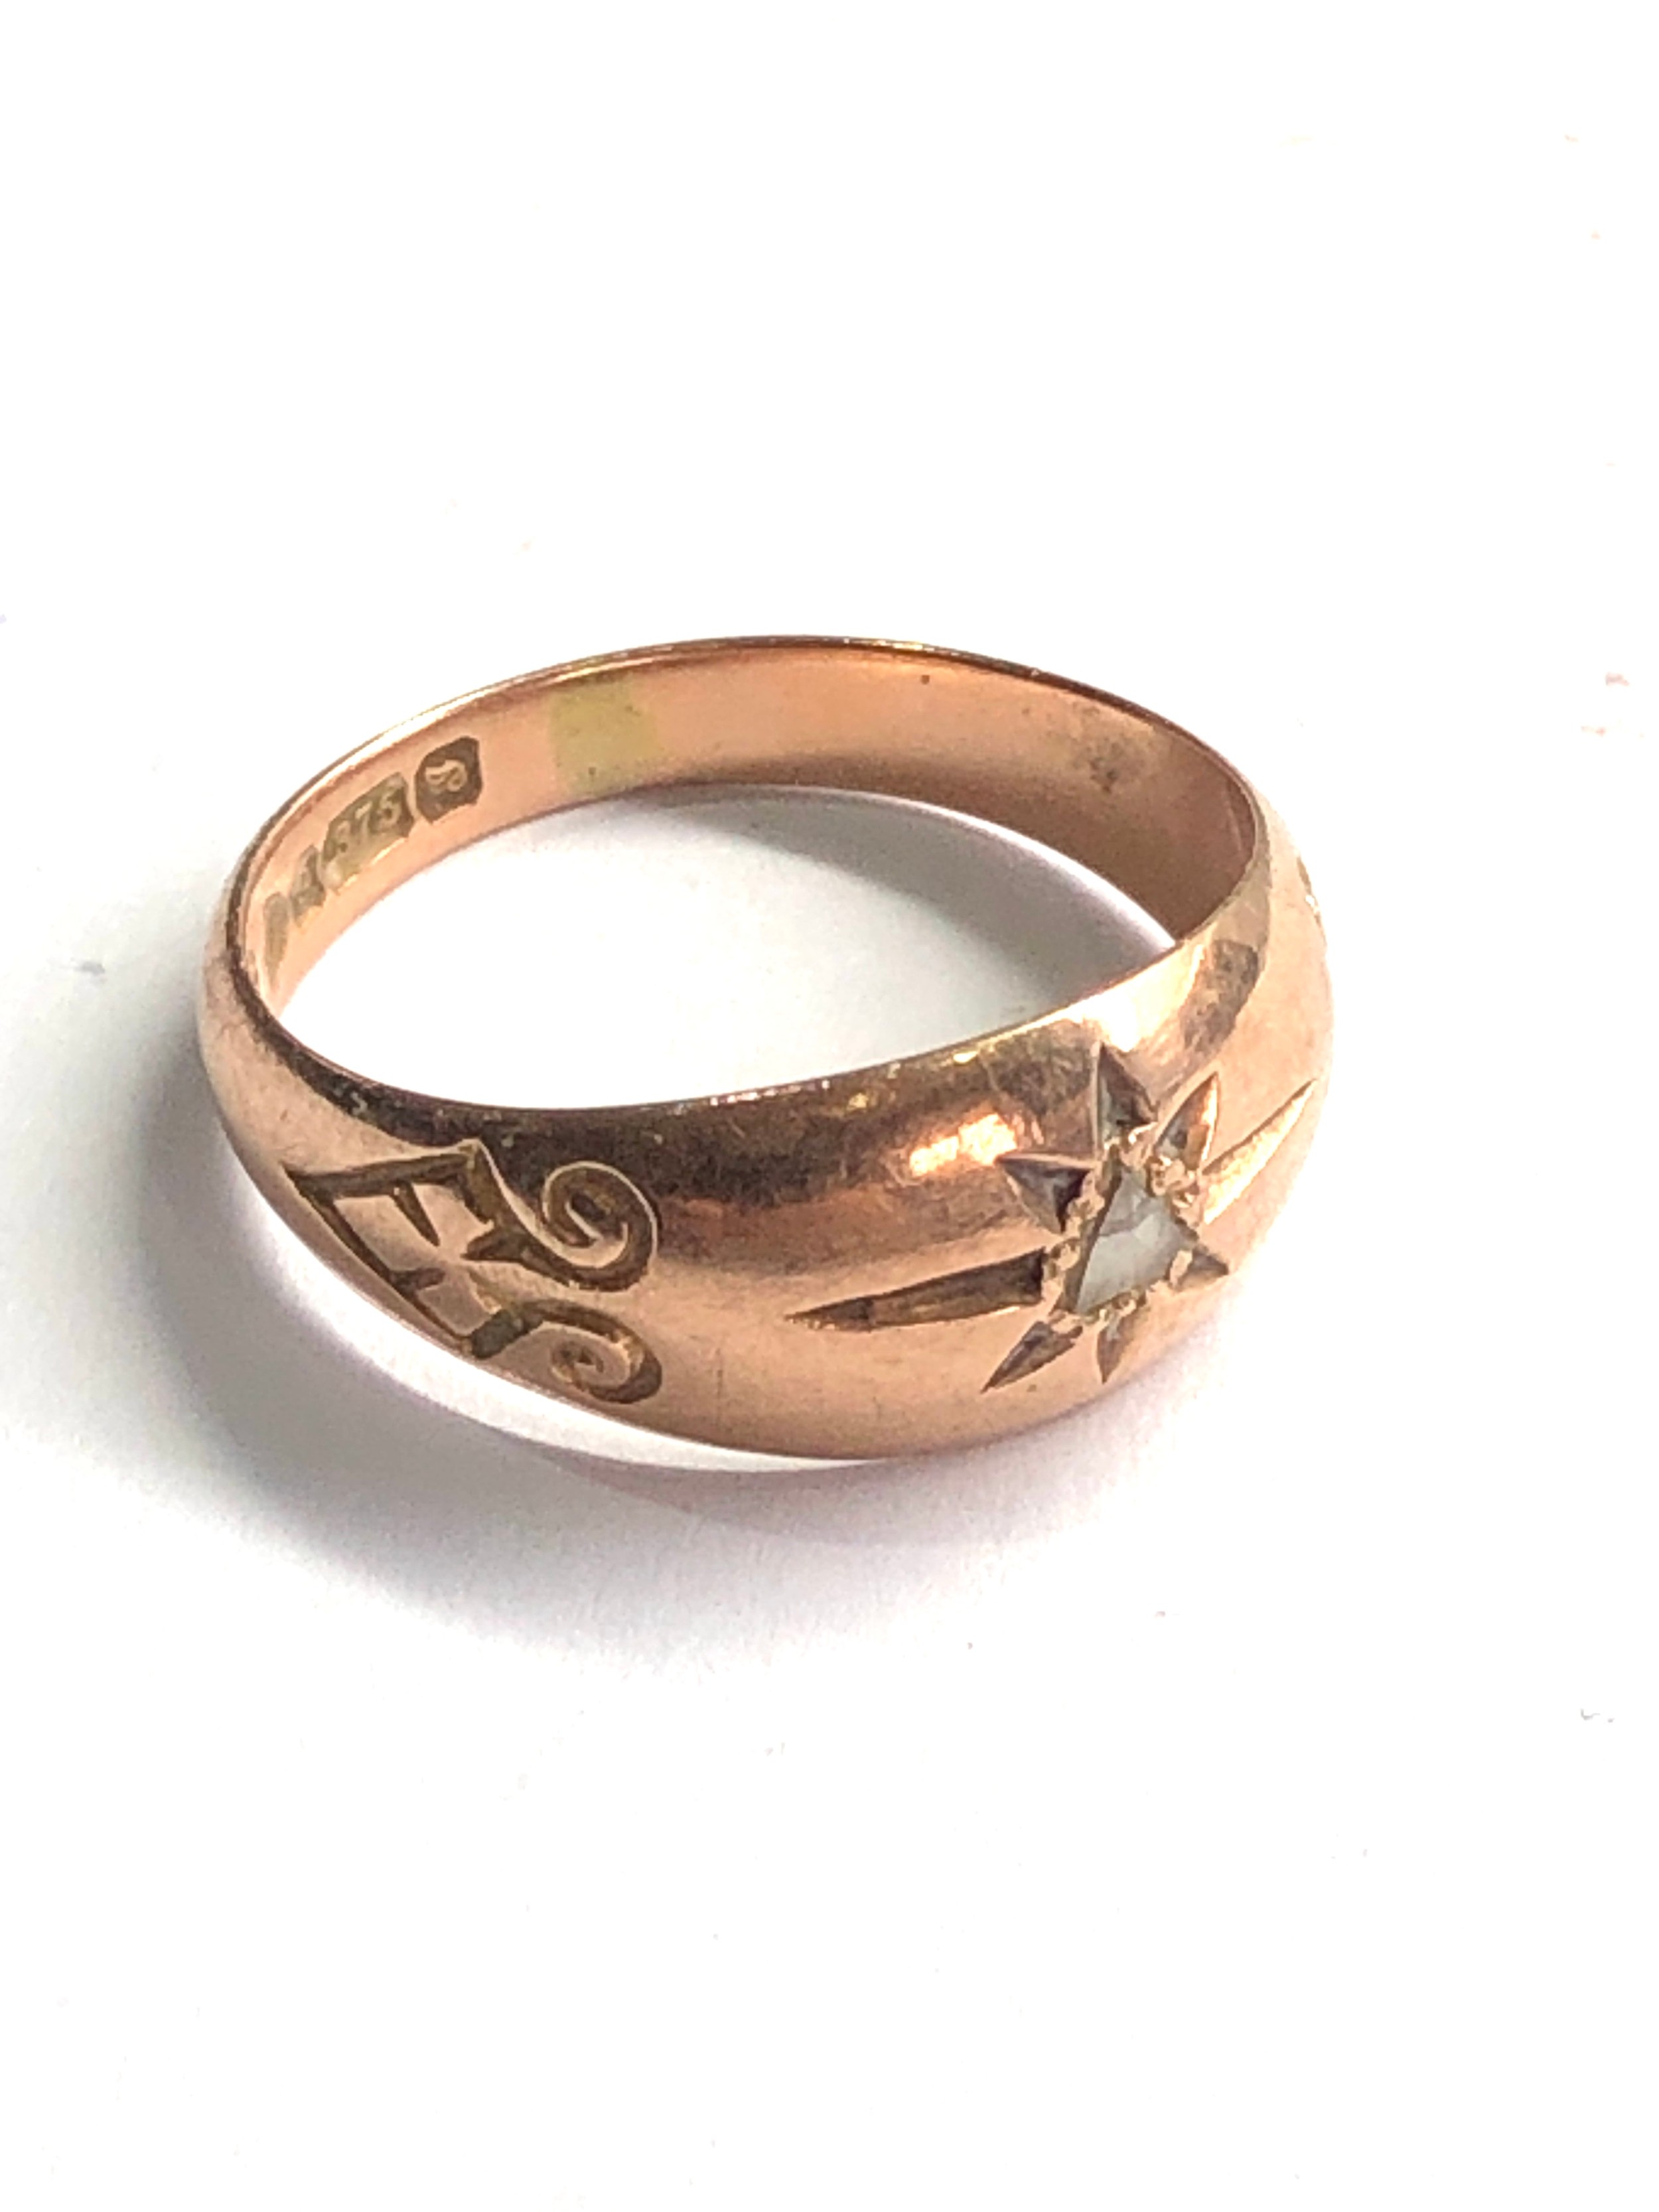 Antique 9ct gold ring weight 2.8g - Image 2 of 3